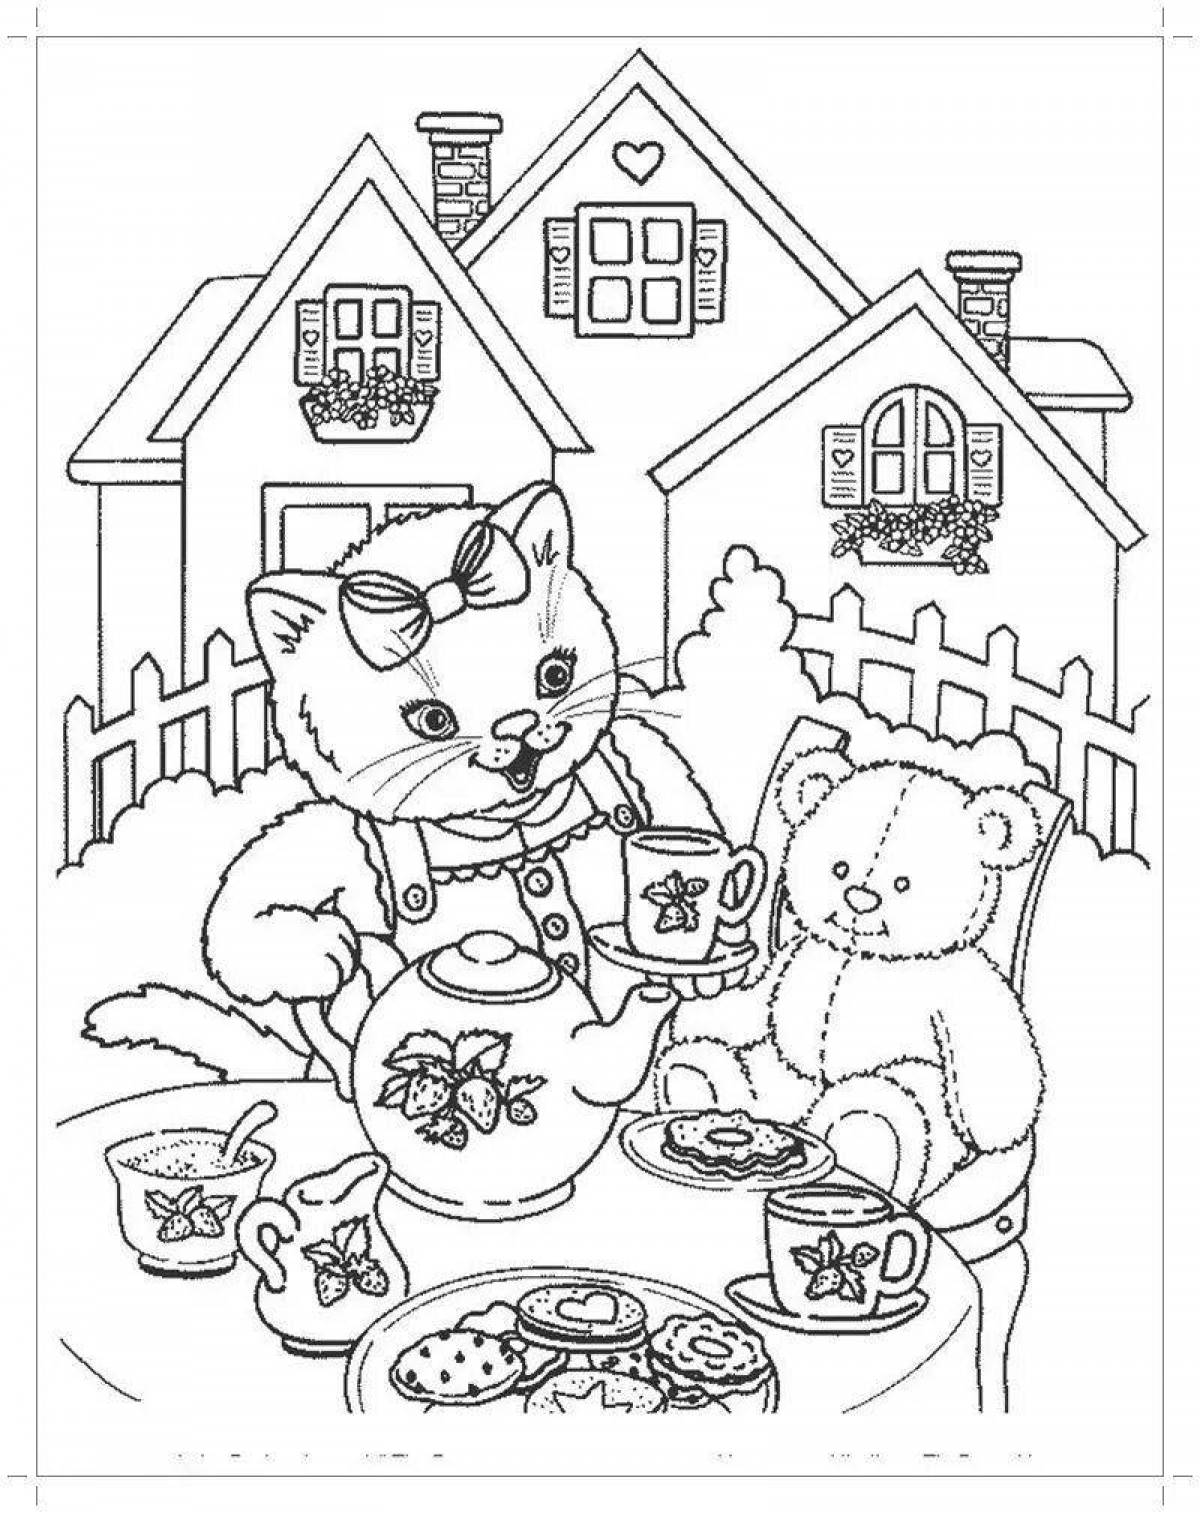 Fabulous cat house coloring book for toddlers